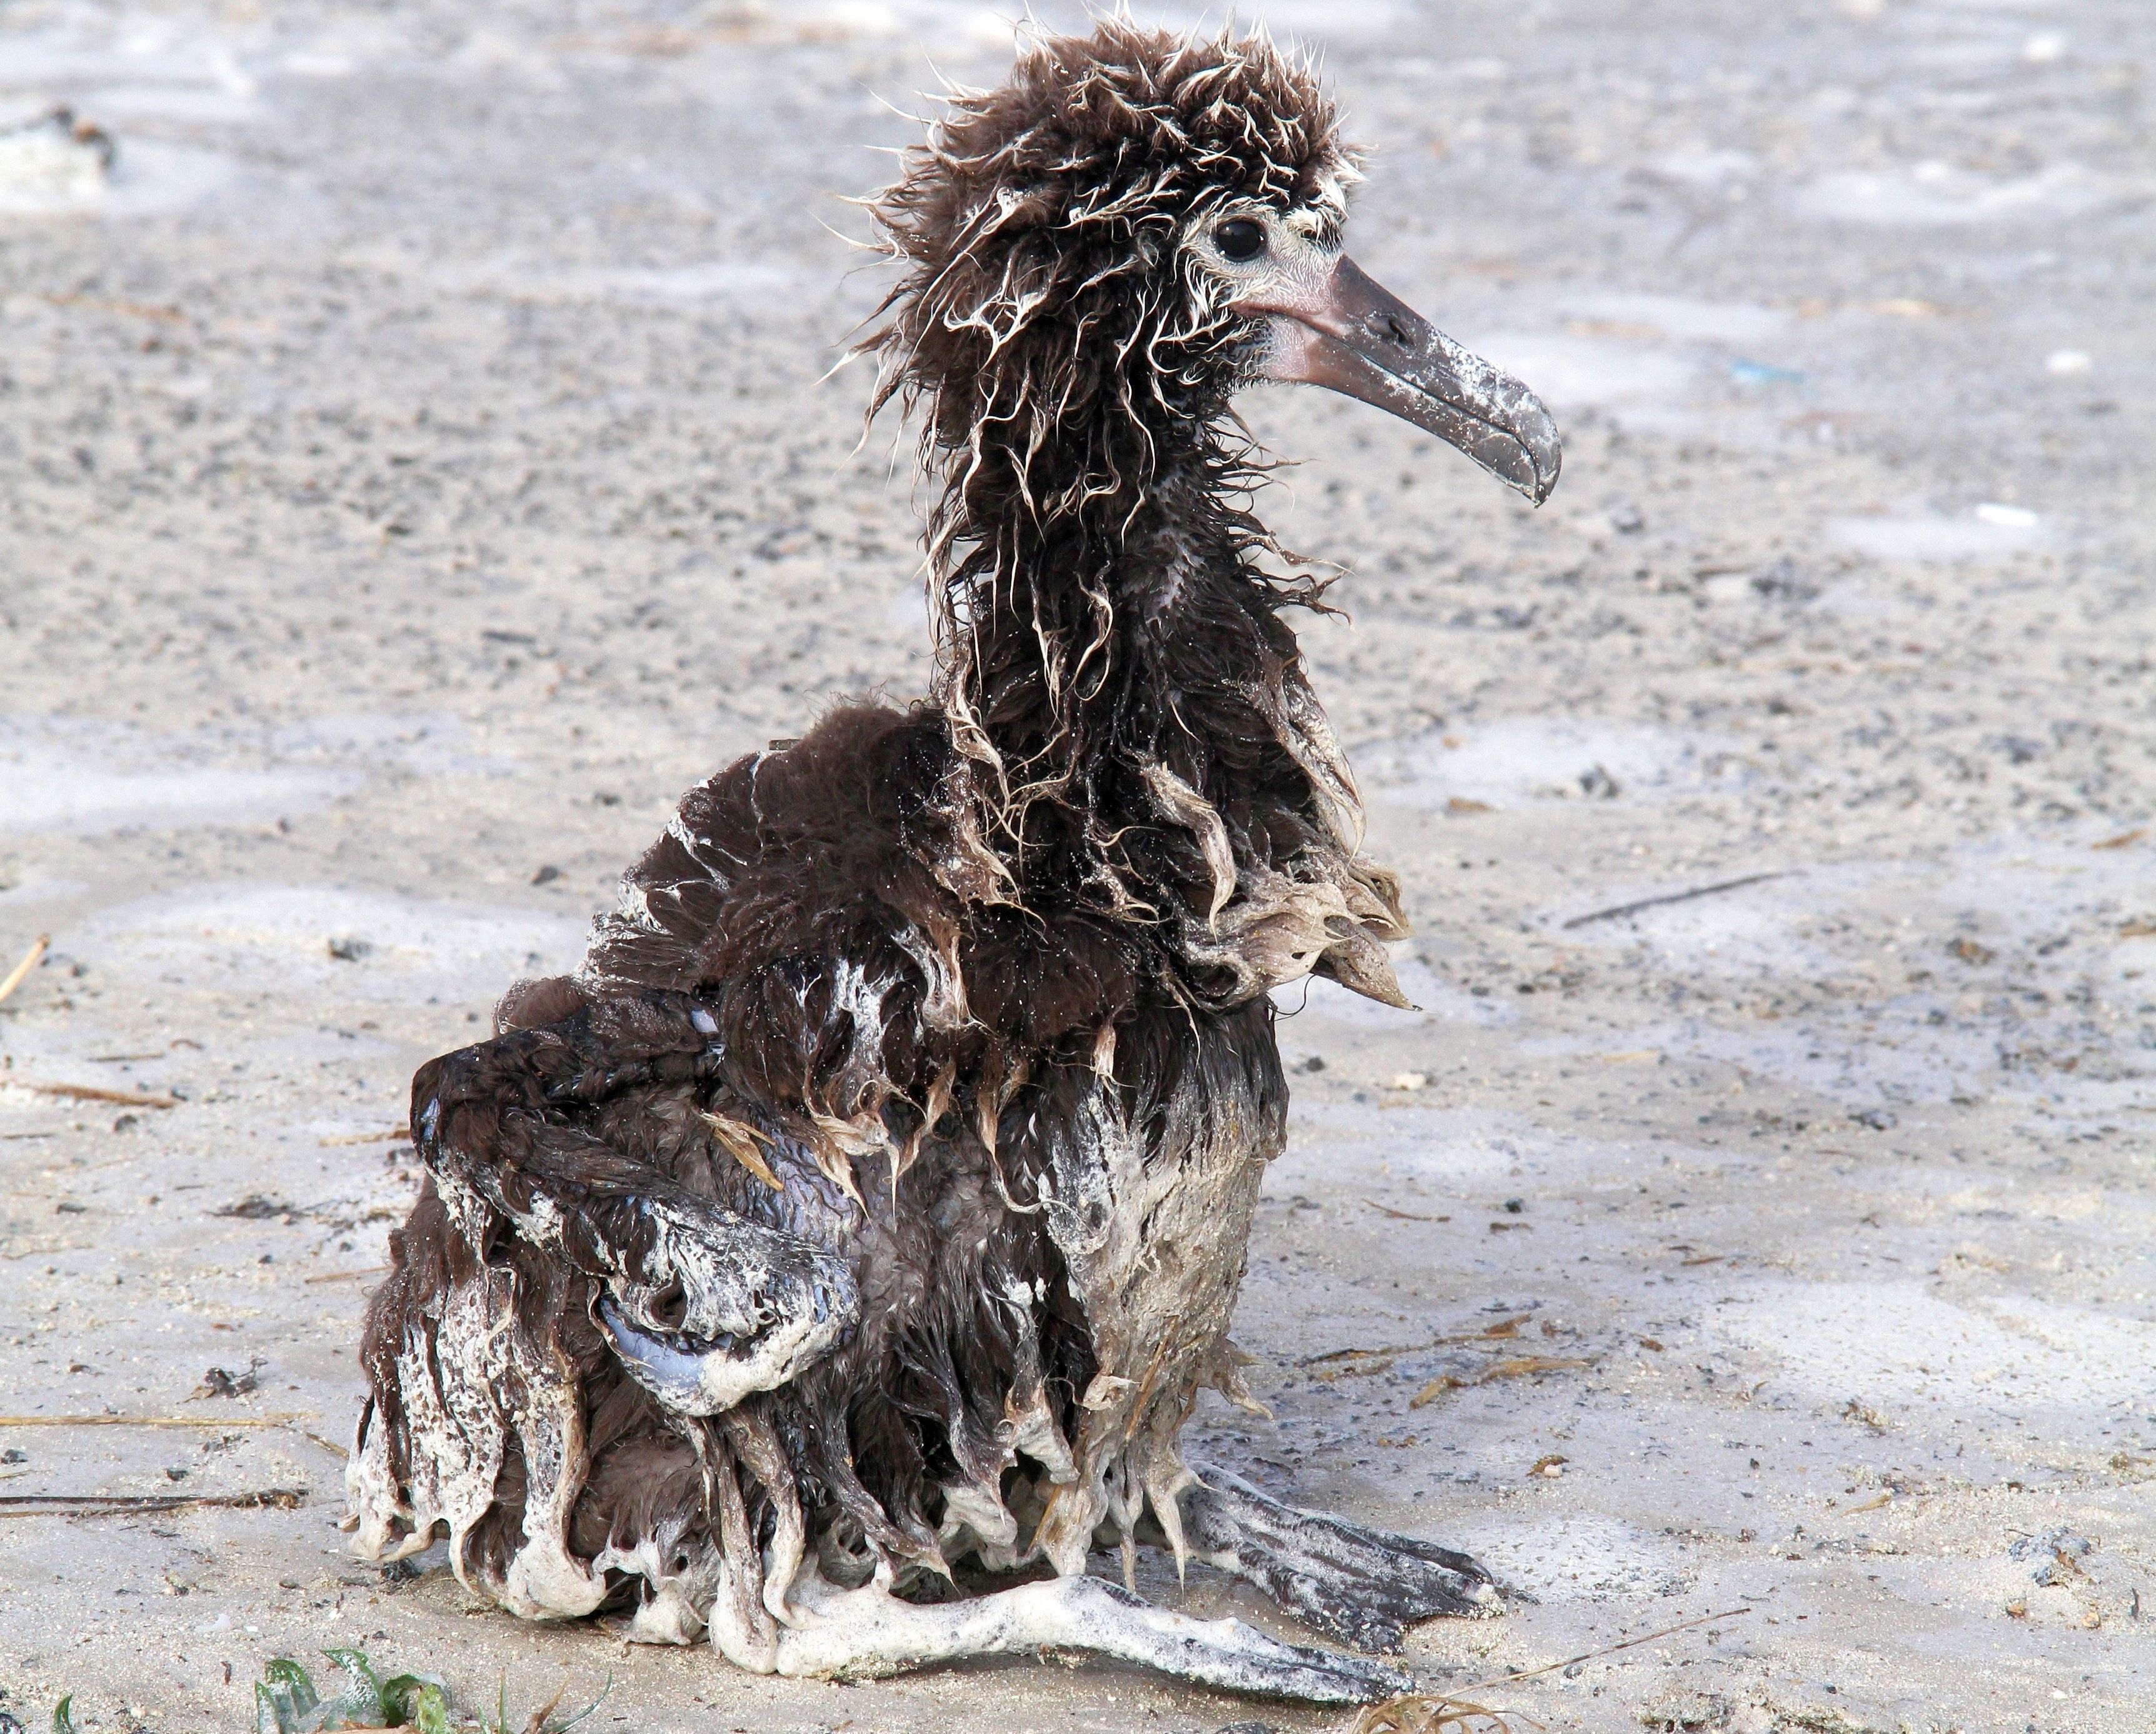 A fluffy brown bird covered in sandy mud on a beach